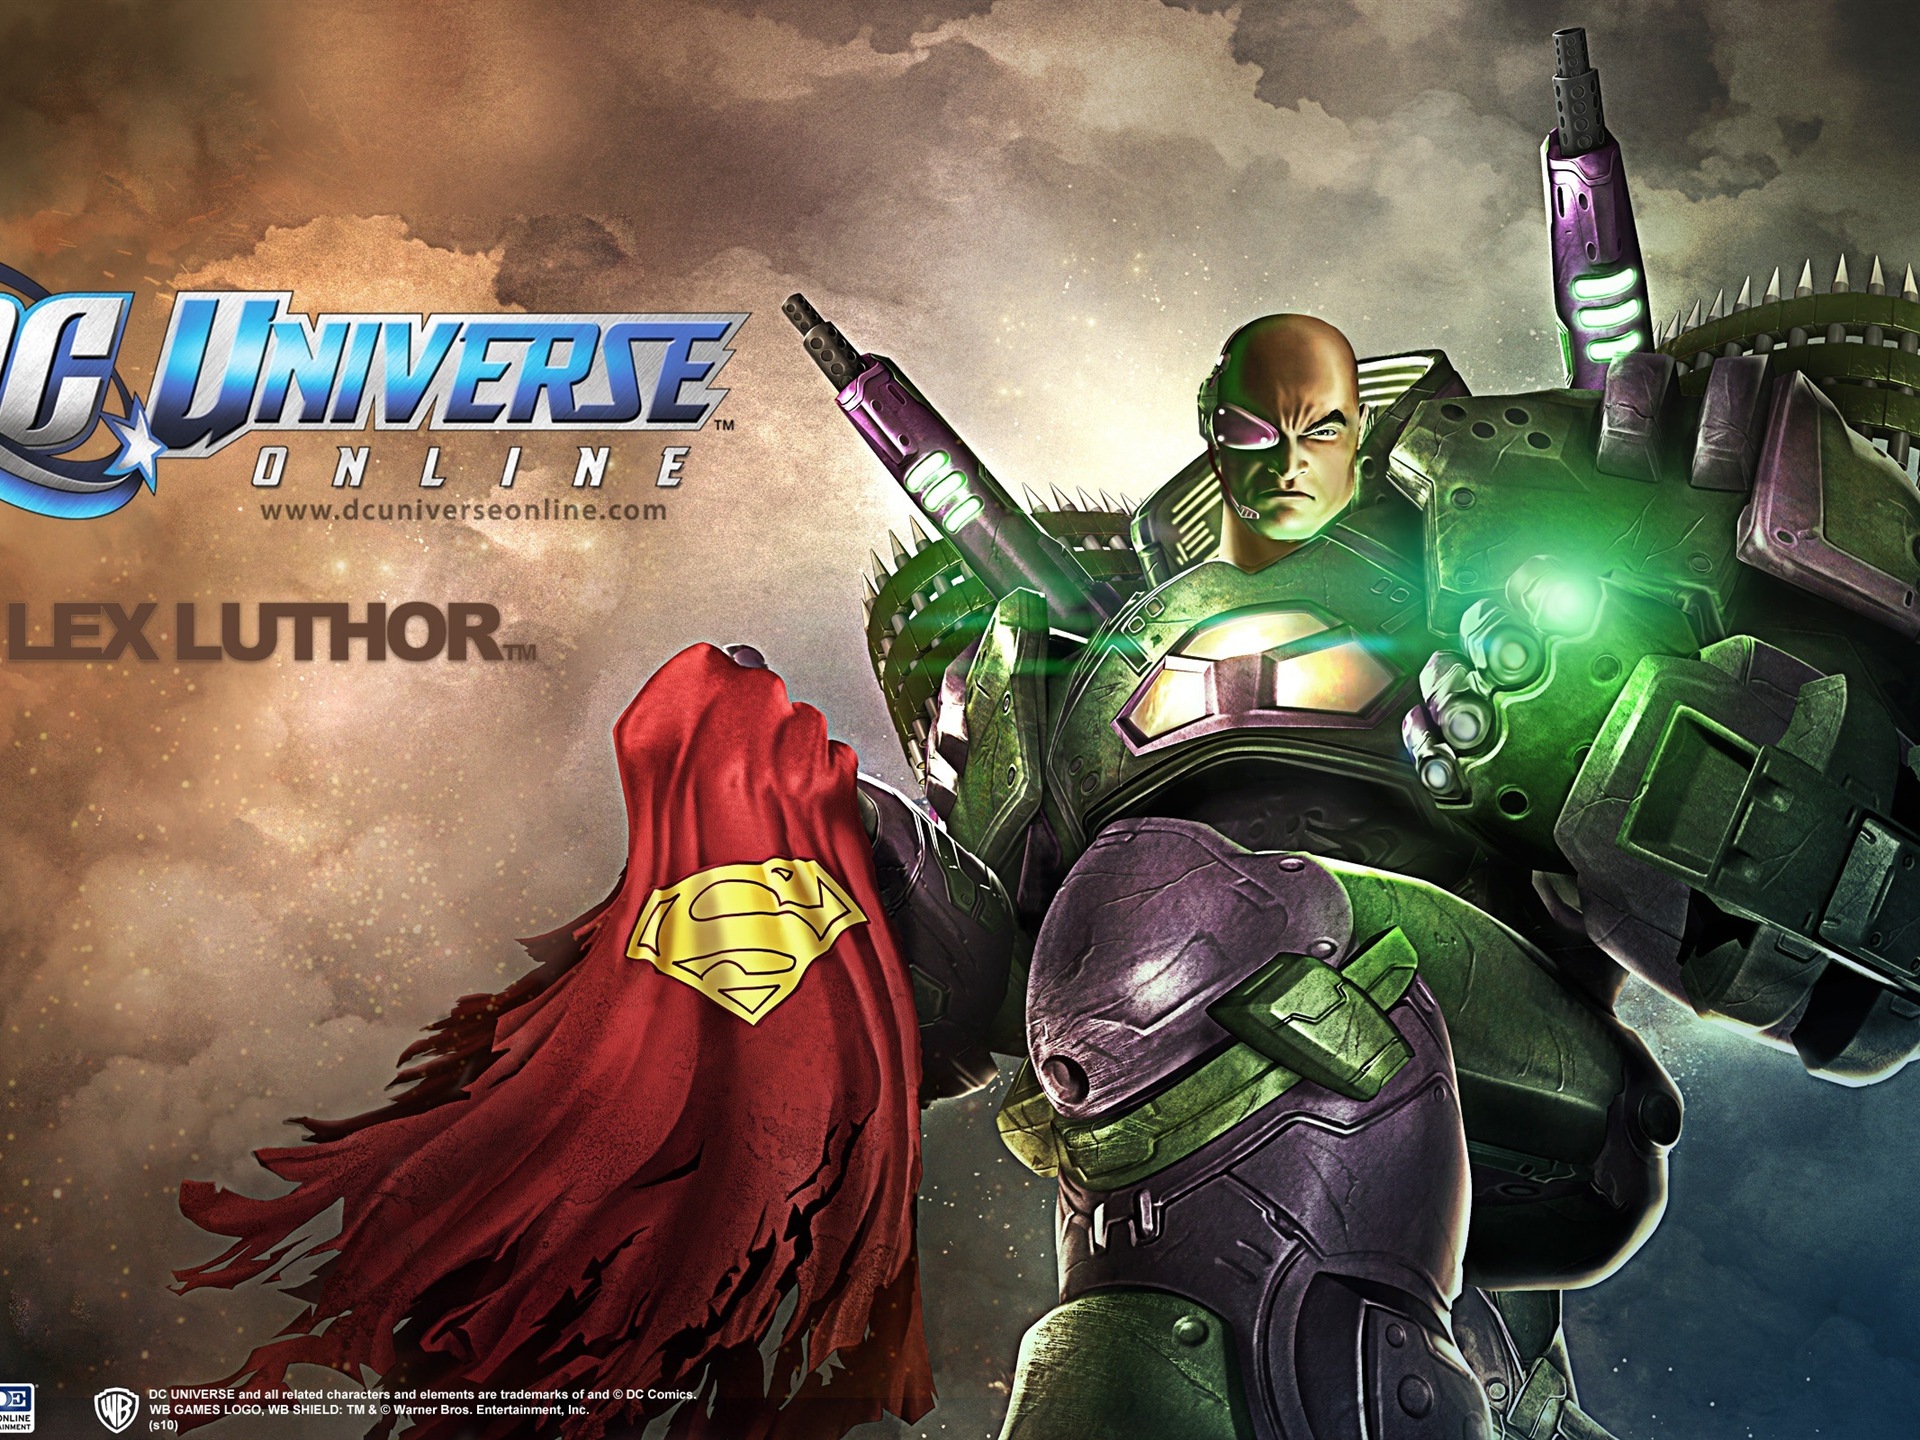 DC Universe Online HD game wallpapers #19 - 1920x1440